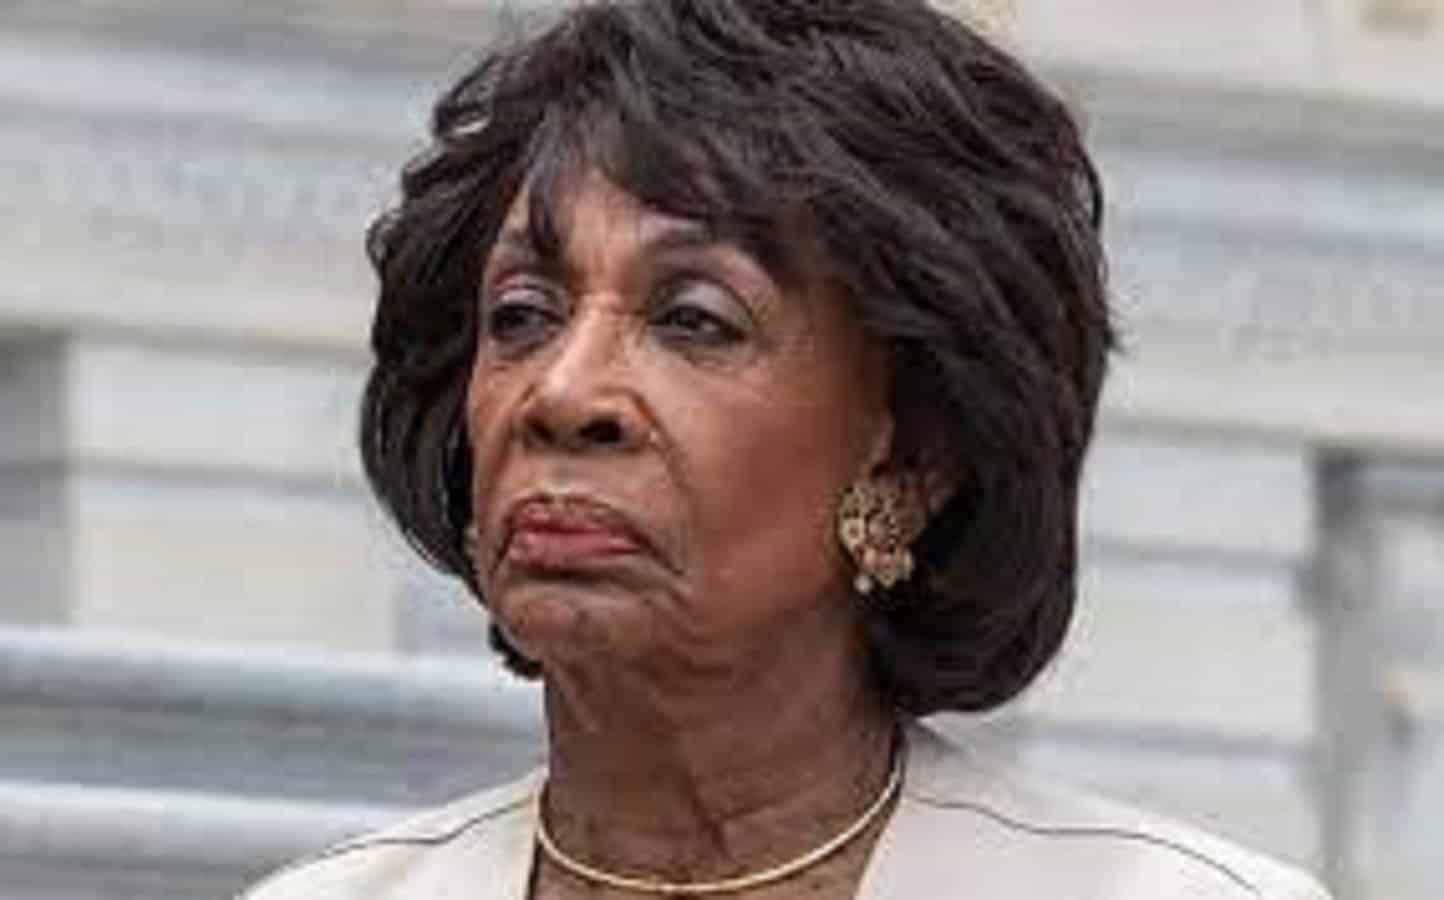 Crazy California Rep. Maxine Waters Goes on Anti-American
Rant on Fourth of July 1